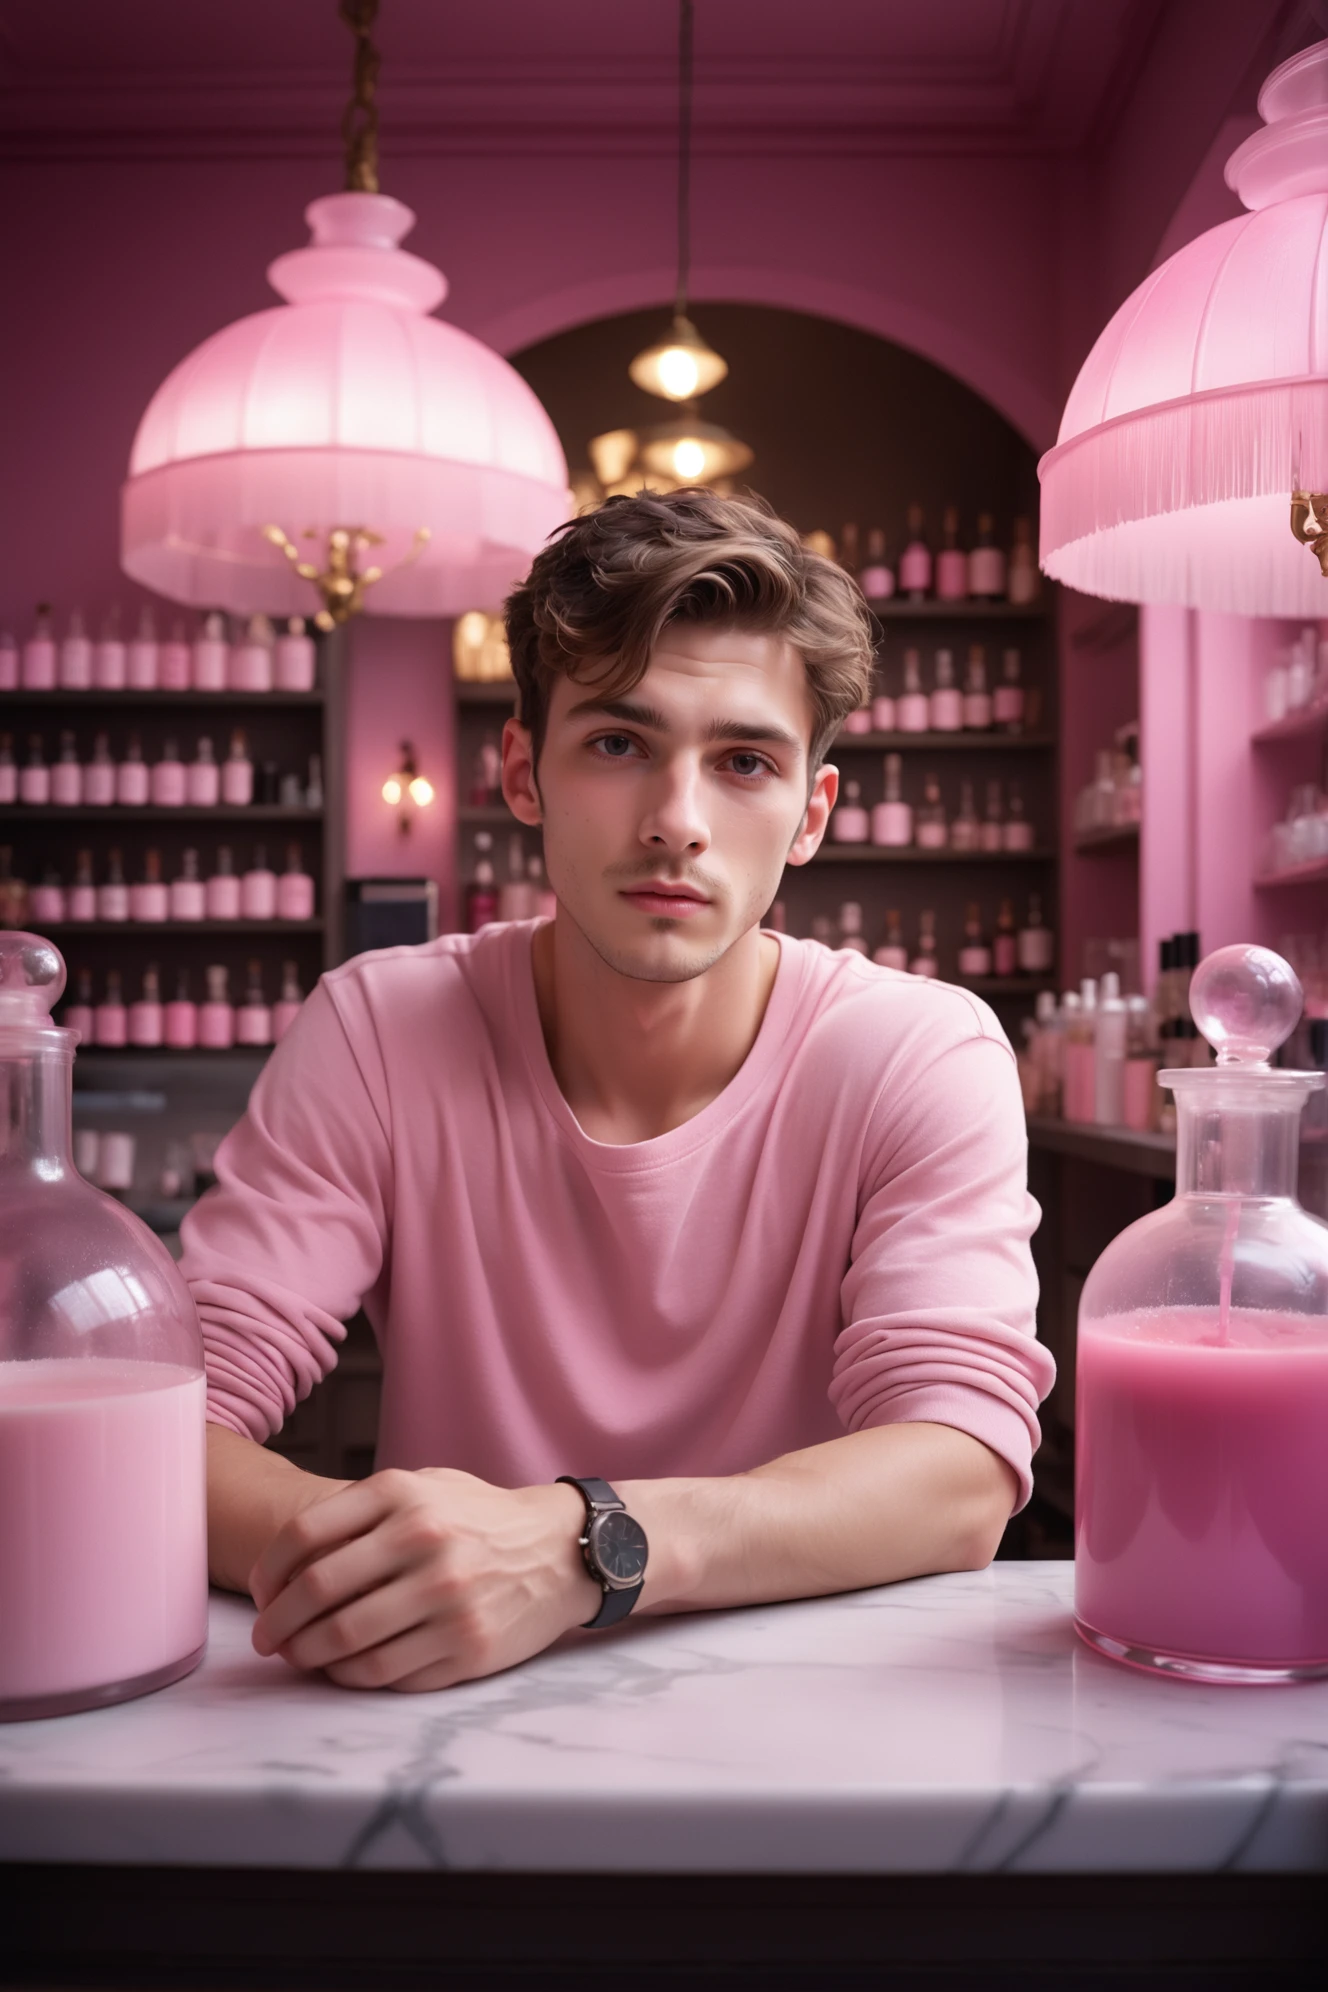 photograph, hyperrealism, cinematic color grading, 1boy, man, ruggedly handsome, well-lit interior, in a Pink Parisian potion shop